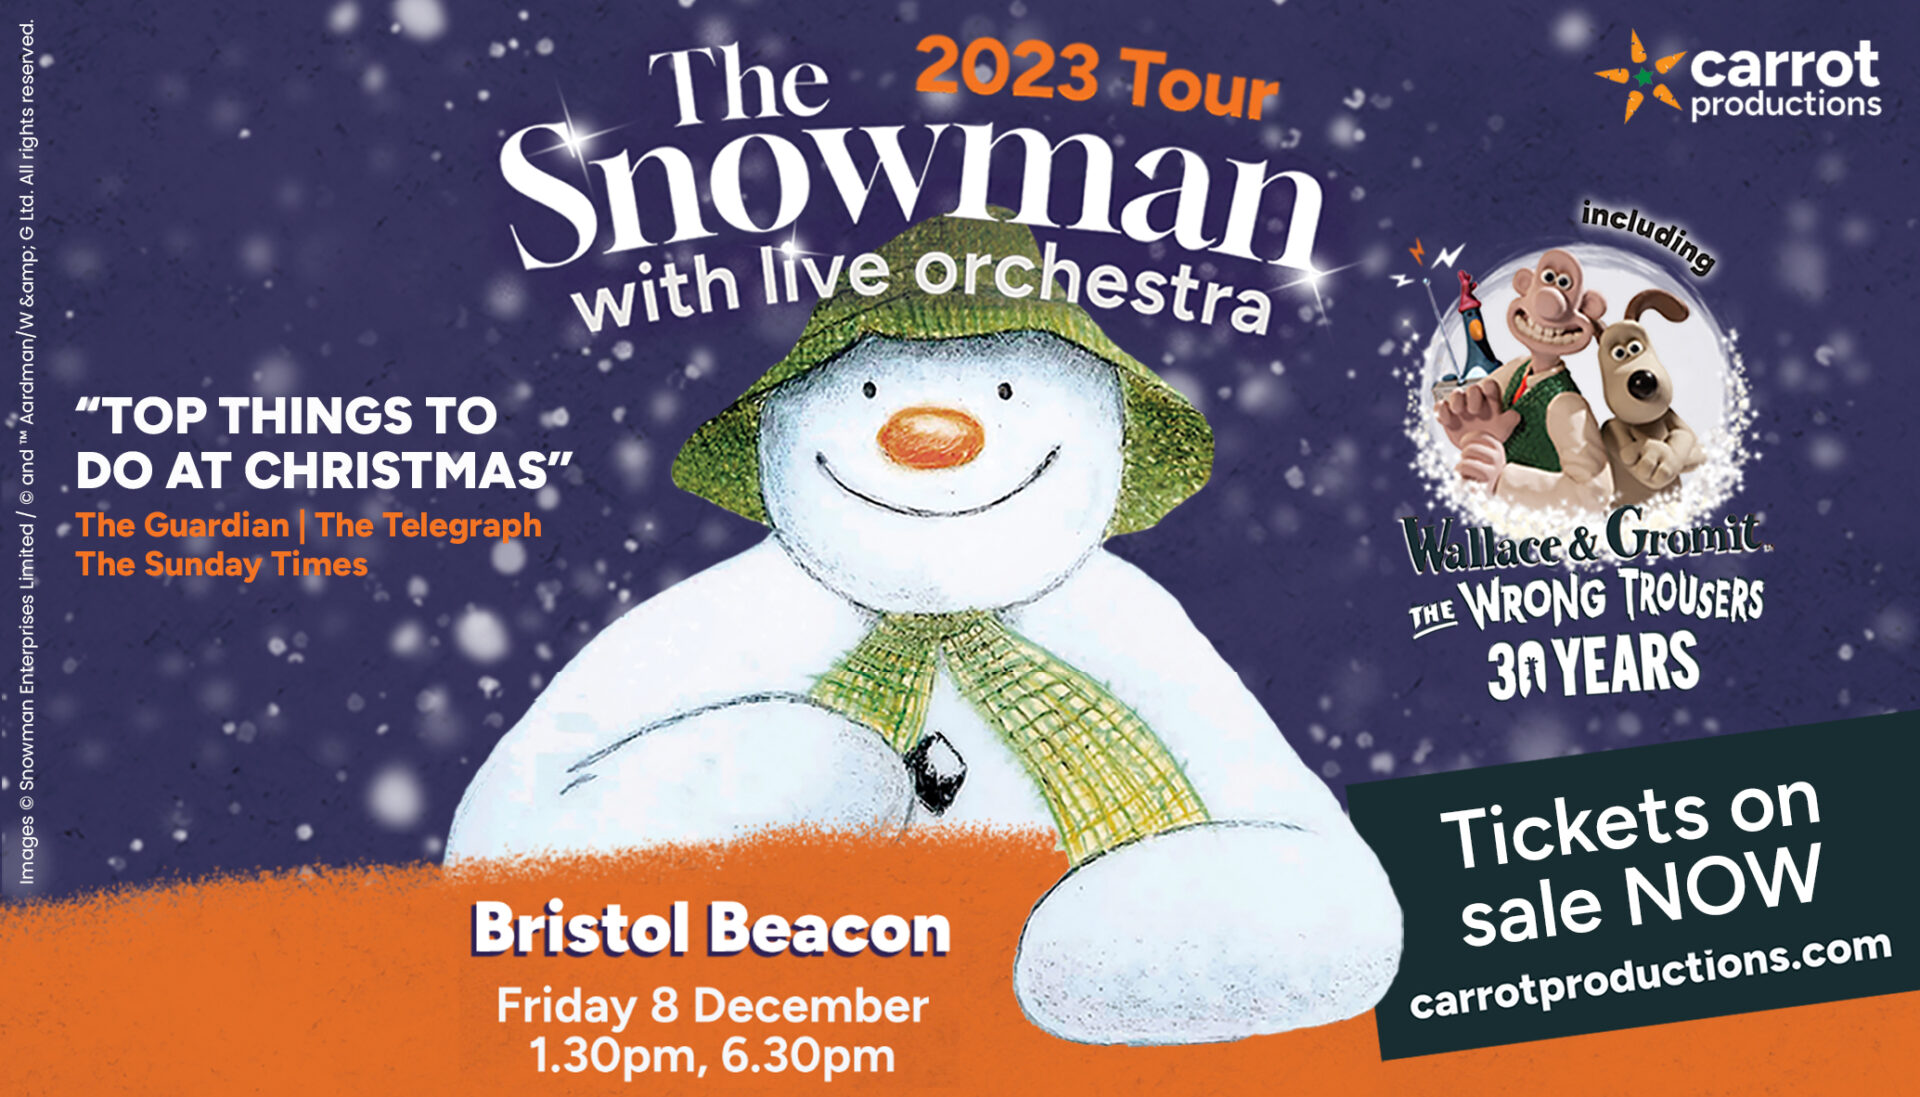 The Snowman film with live orchestra including Wallace & Gromit: The Wrong Trousers